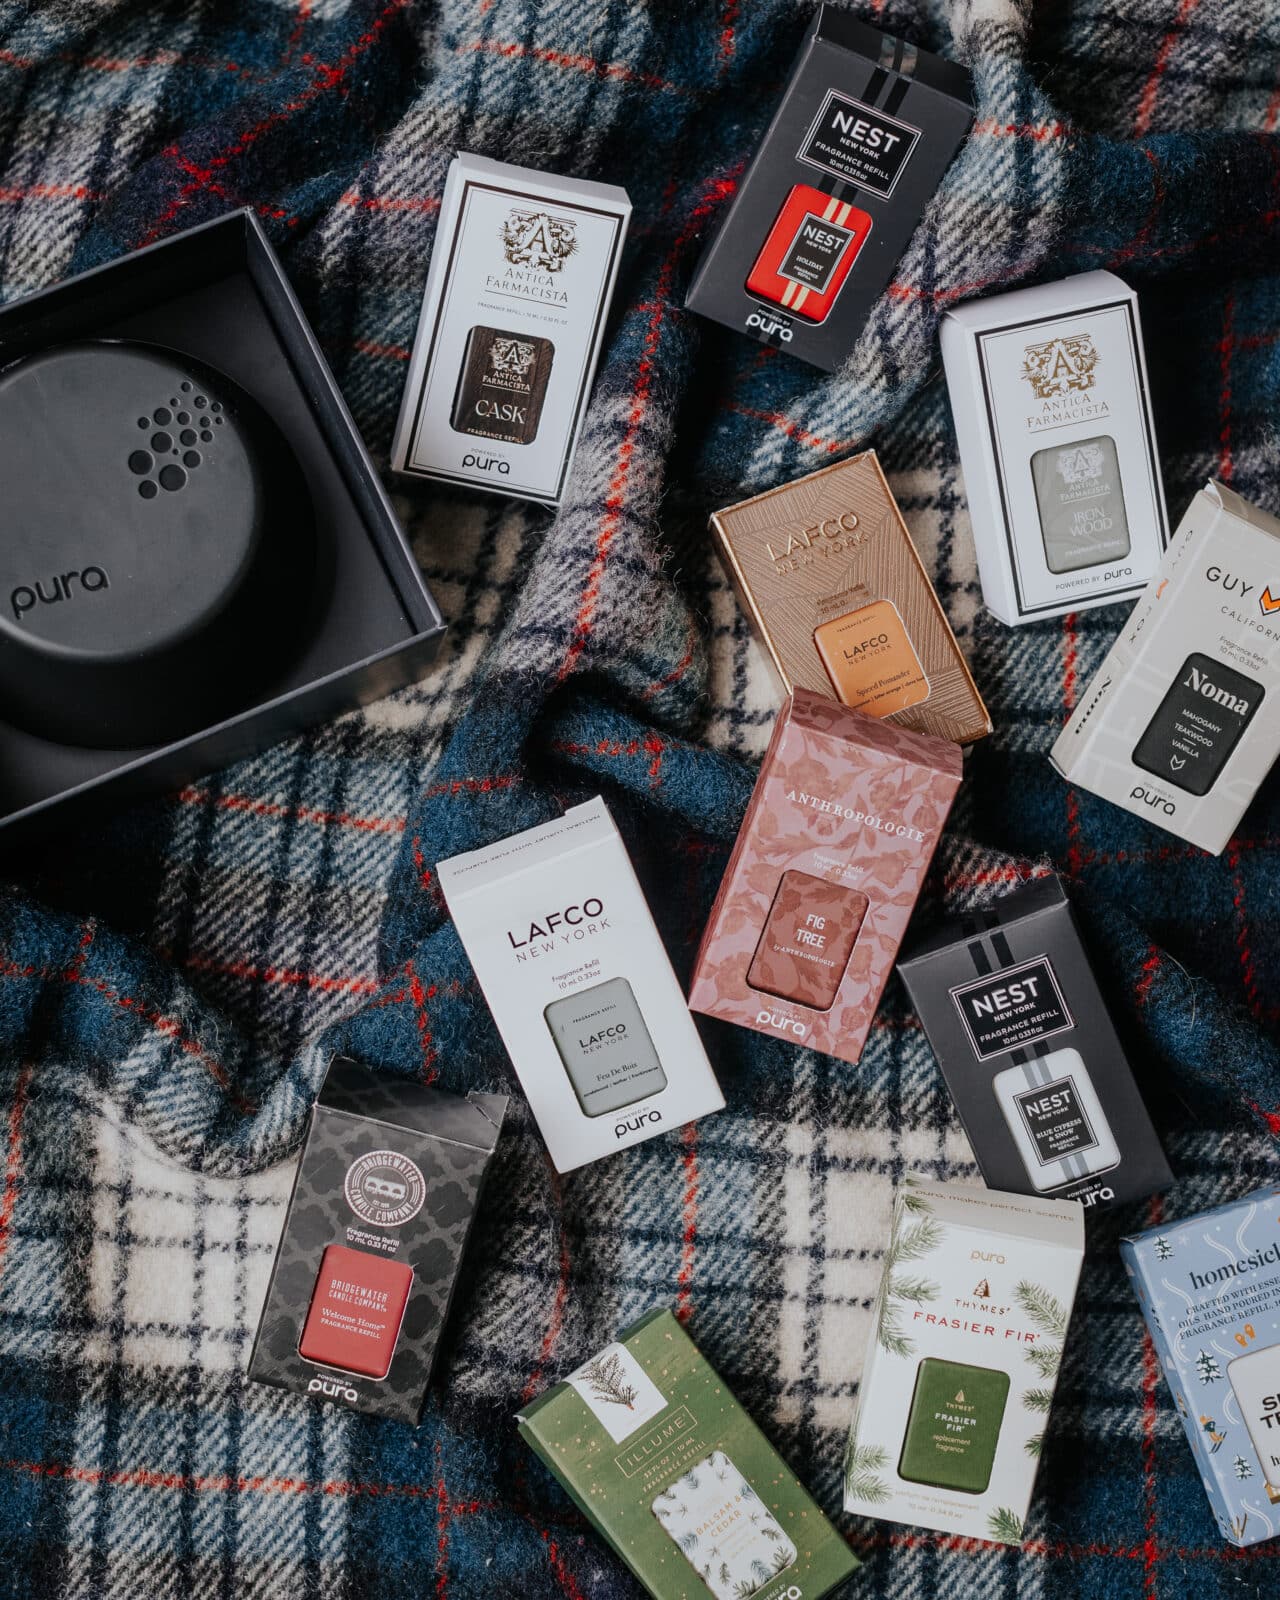 Introducing the Exclusive Black Pura Device + The Best Pura Scents for